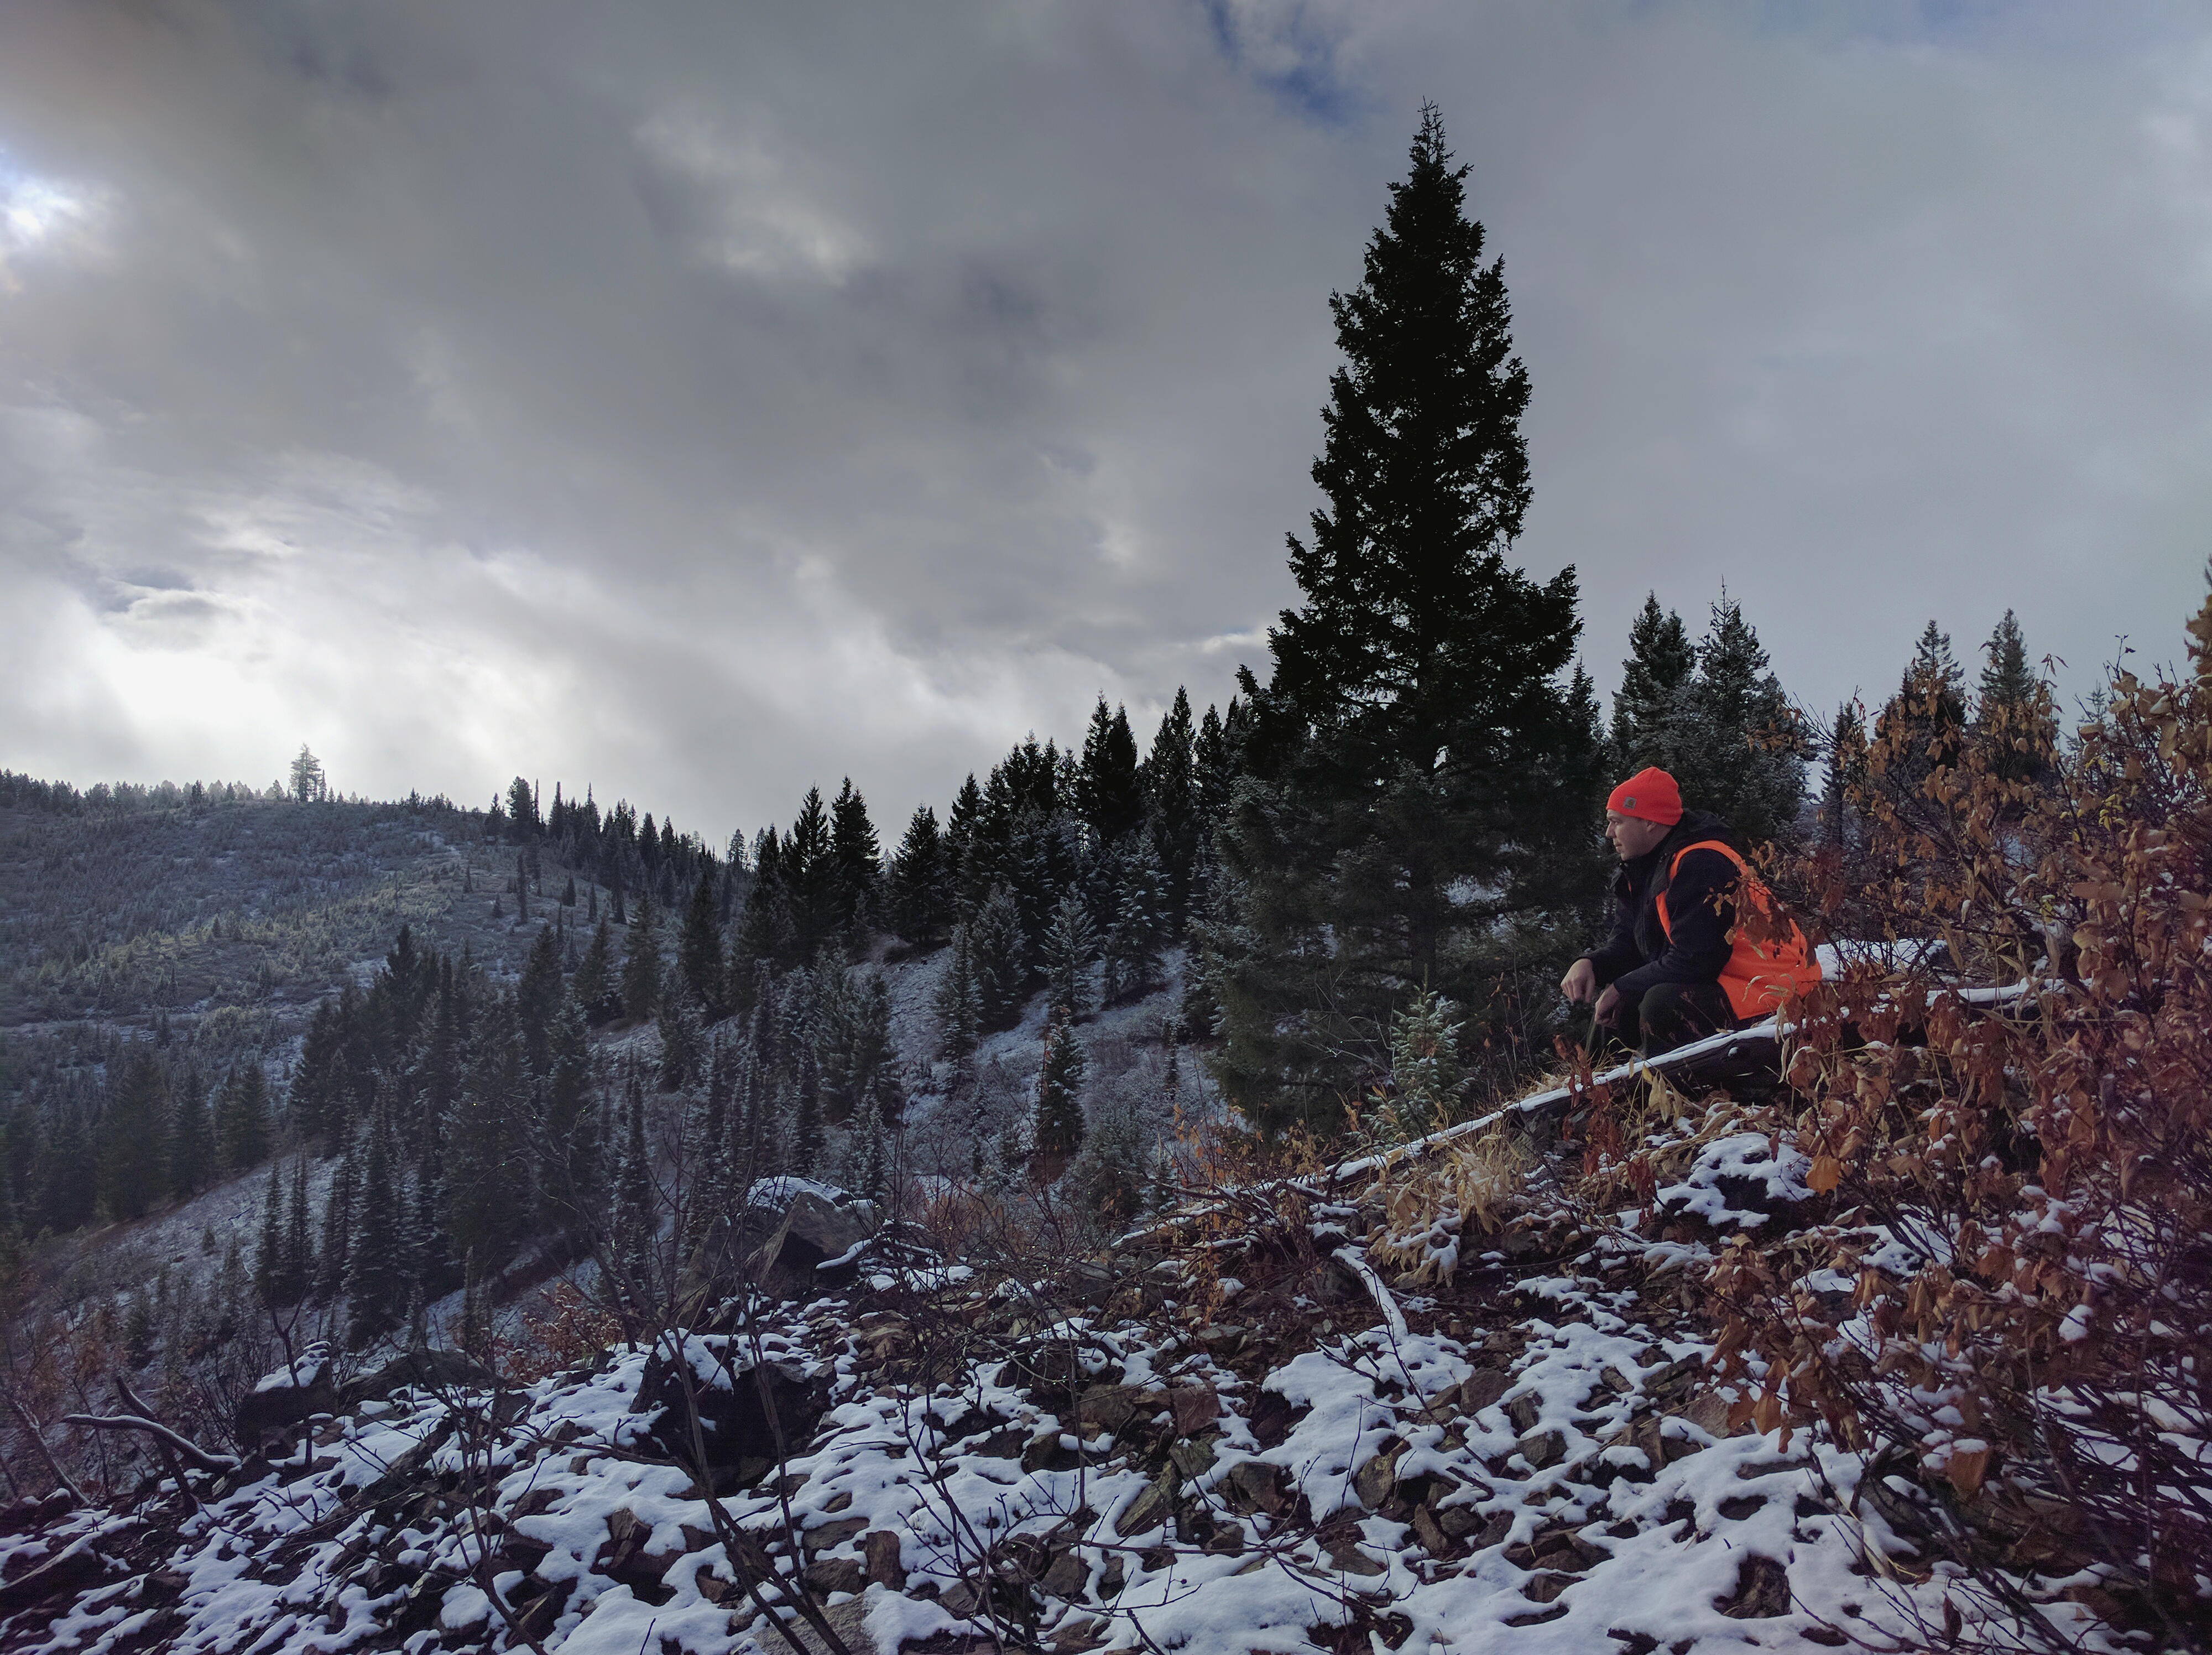 big game hunter dressed in hunter orange looking for game on a mountain ridge with some snow on the ground Ben Studer medium shot, November 2016